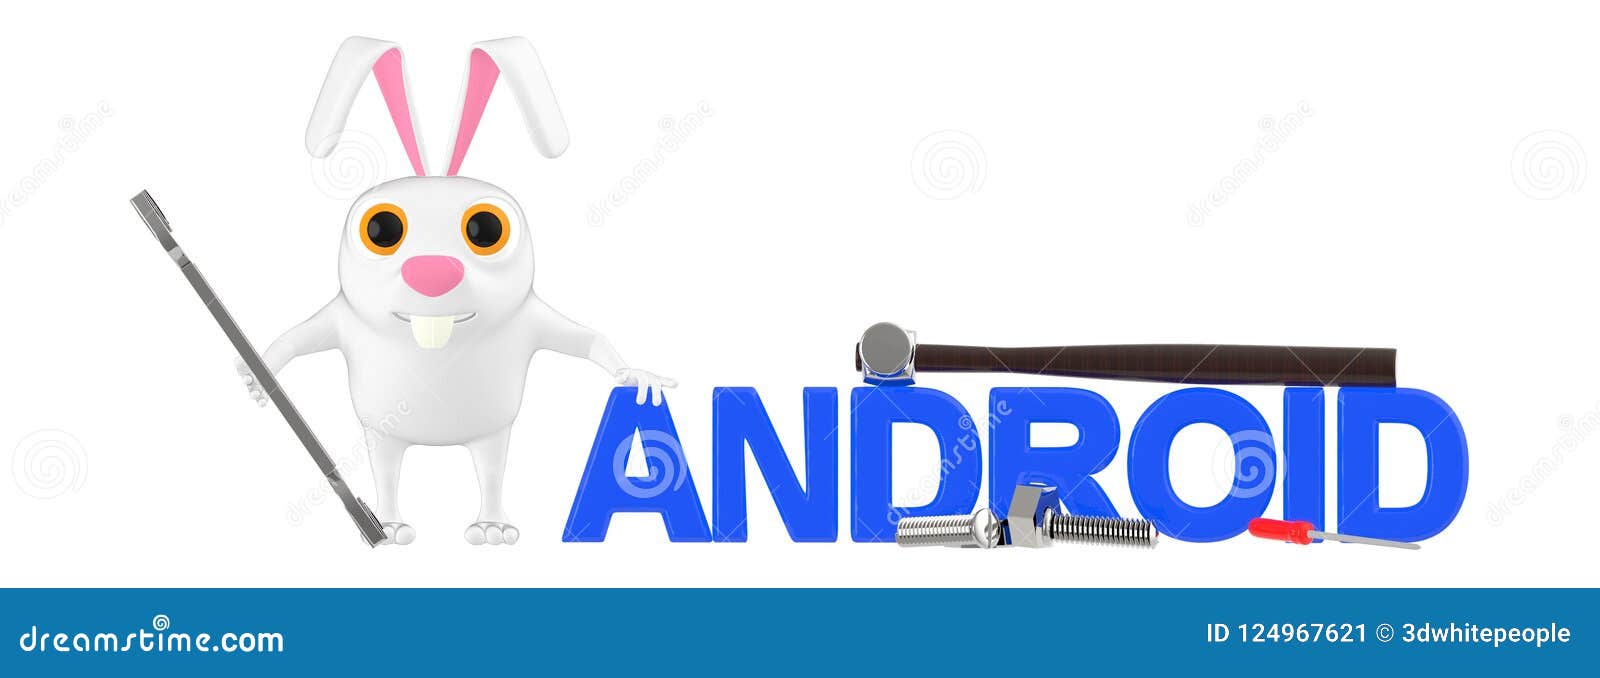 3d character , rabbit holding a wrench, and a hammer placed over andriod text , screws , nuts and a driver on ground